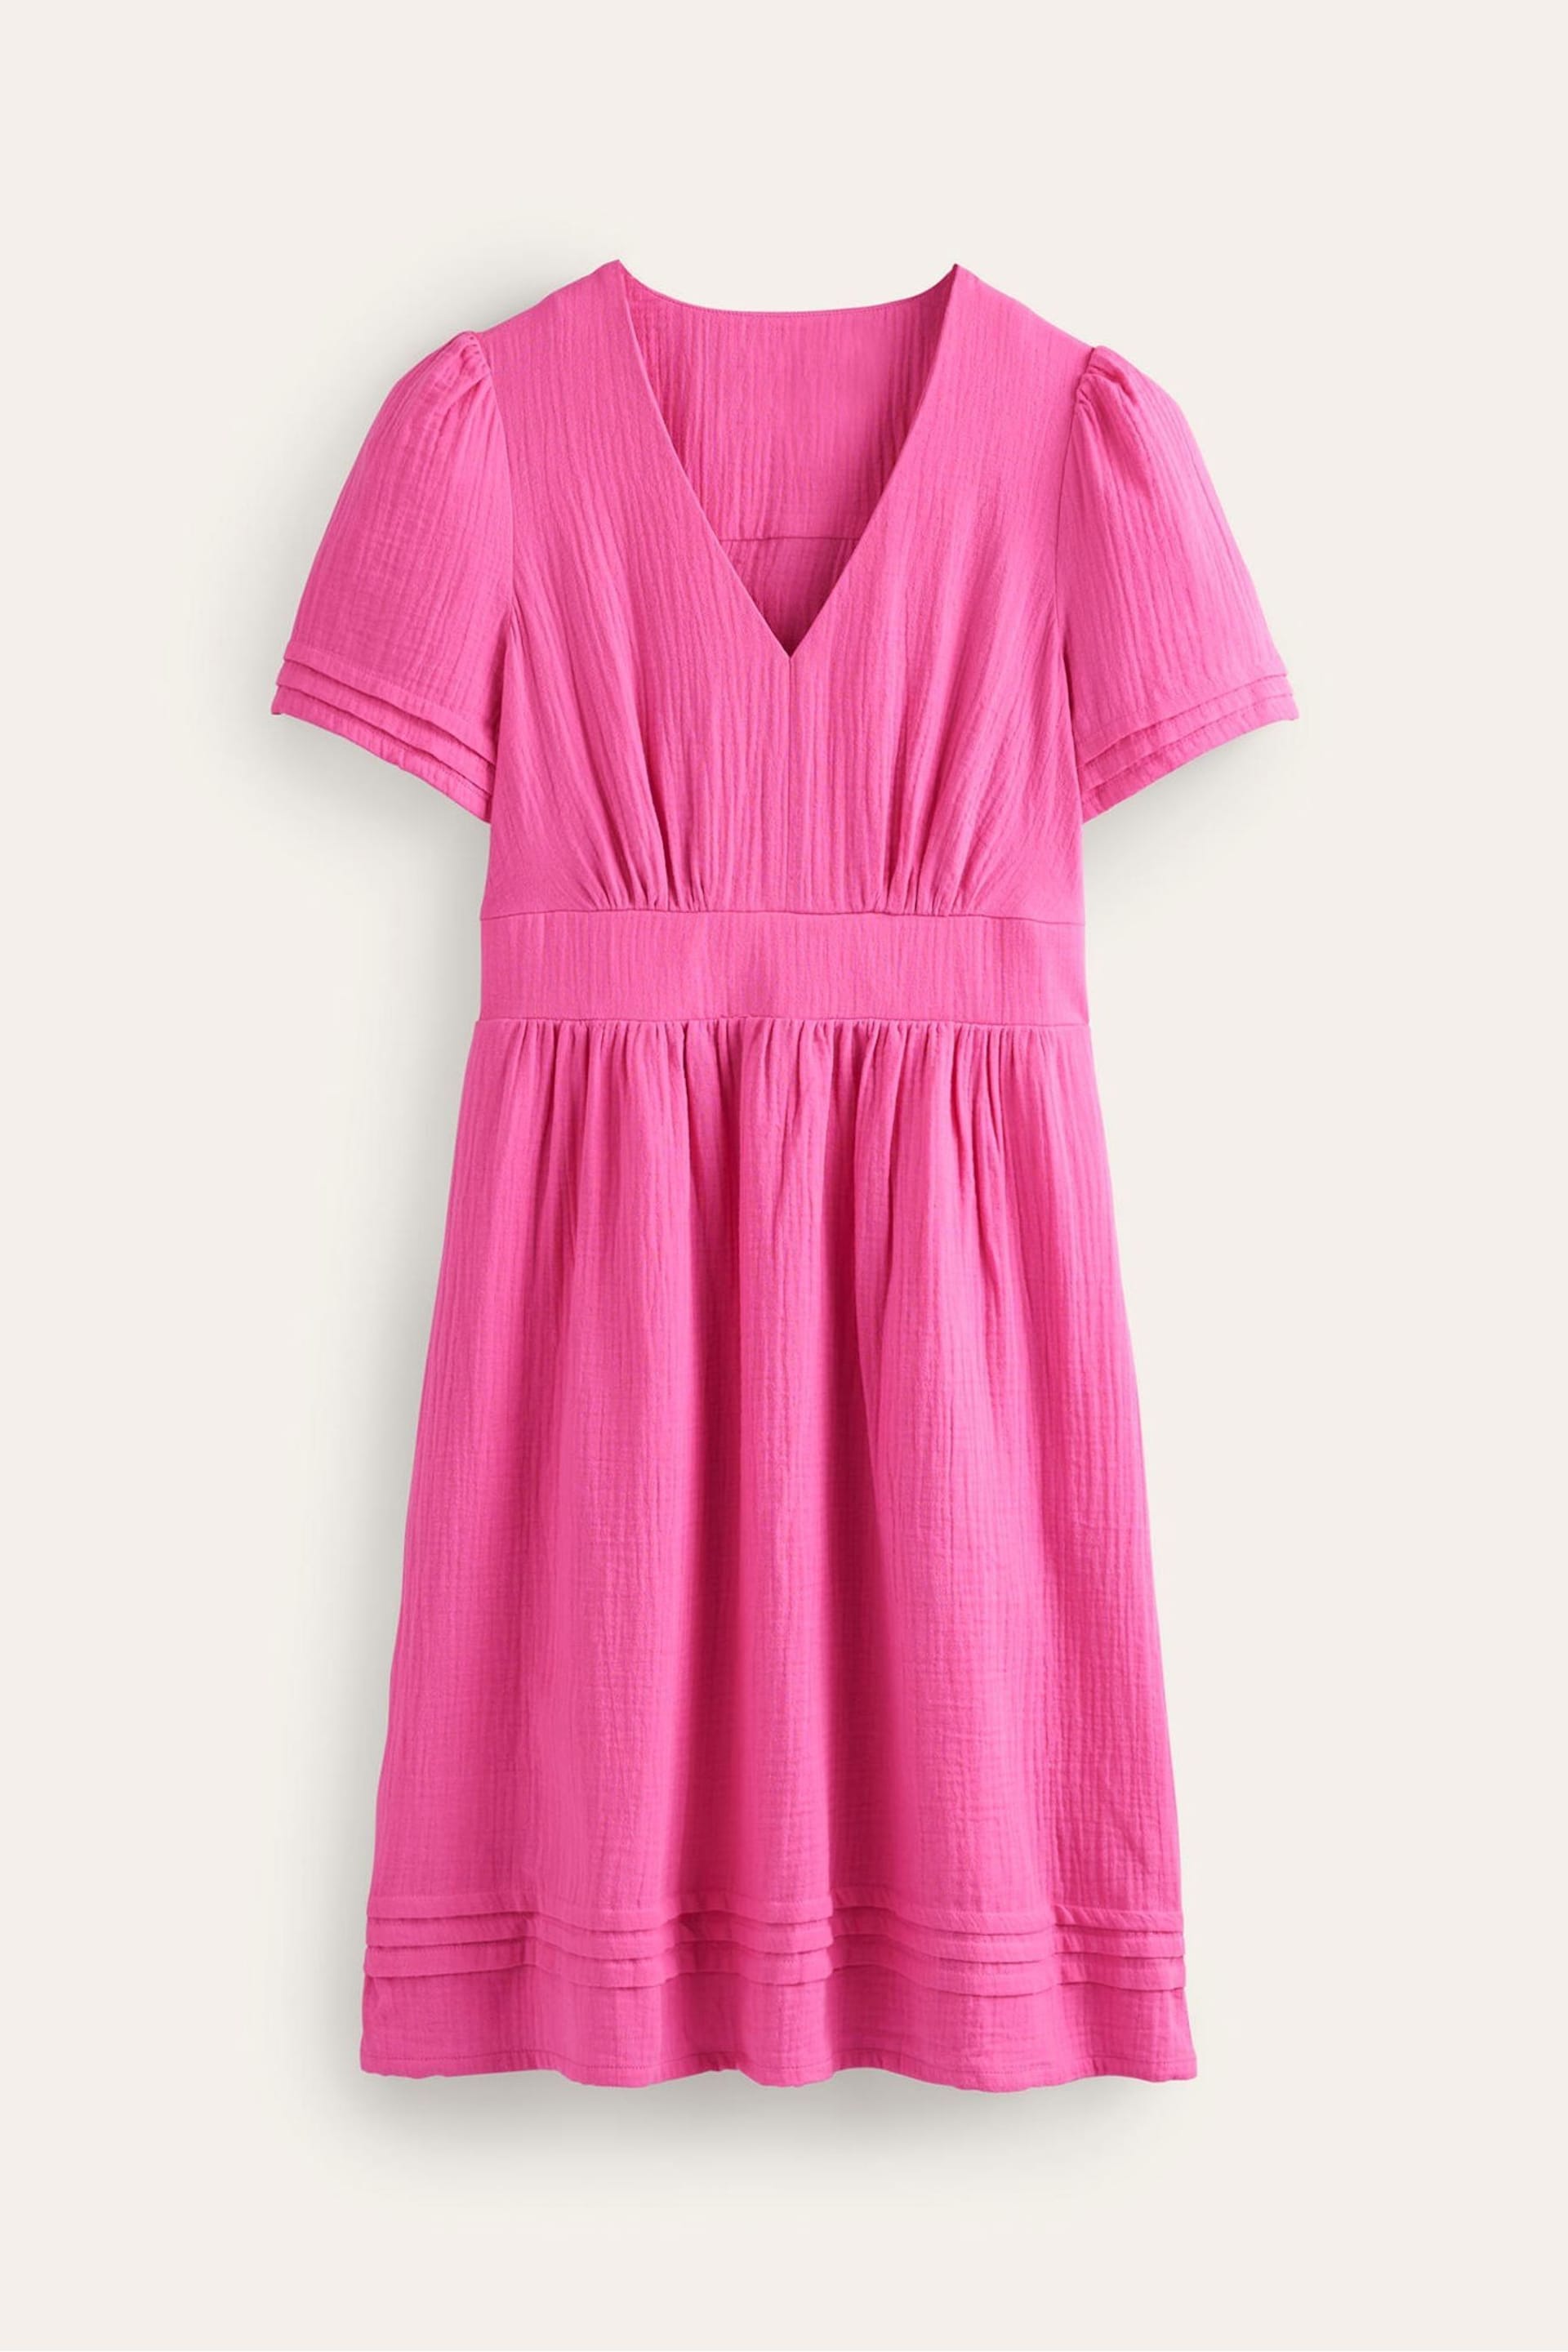 Boden Pink Eve Double Cloth Short Dress - Image 5 of 5